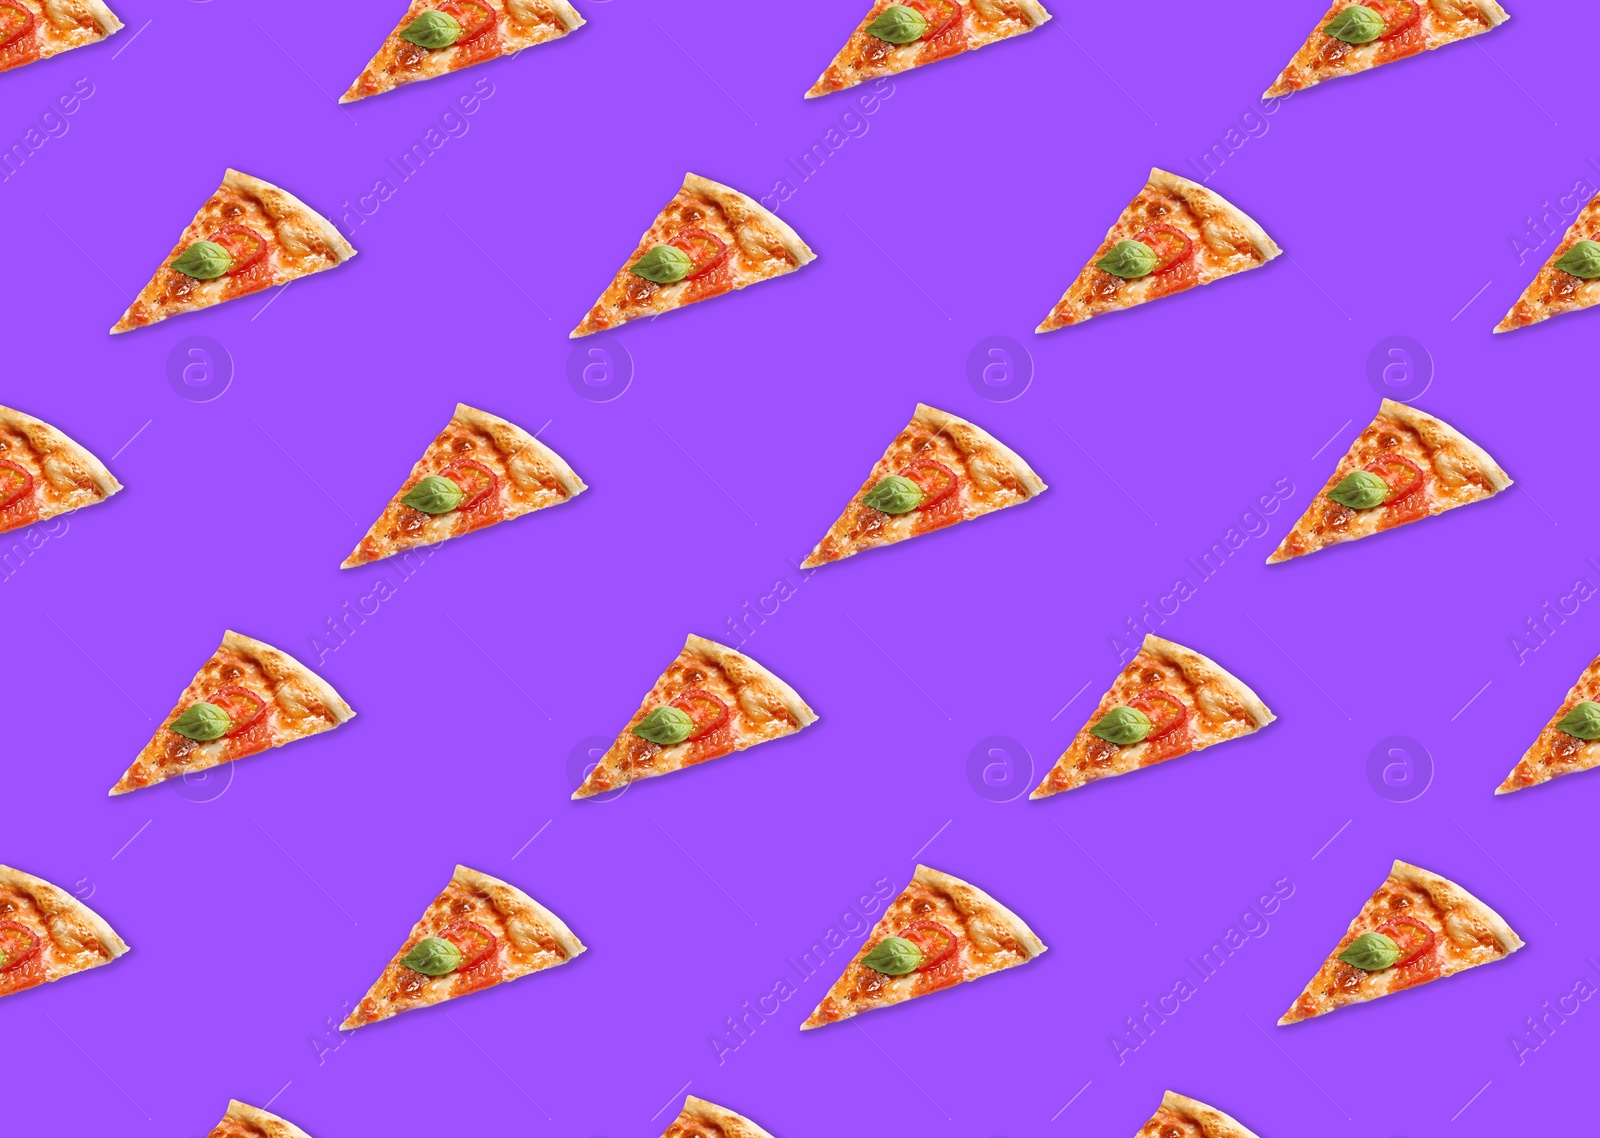 Image of Slices of delicious Margherita pizzas on violet background. Seamless pattern design